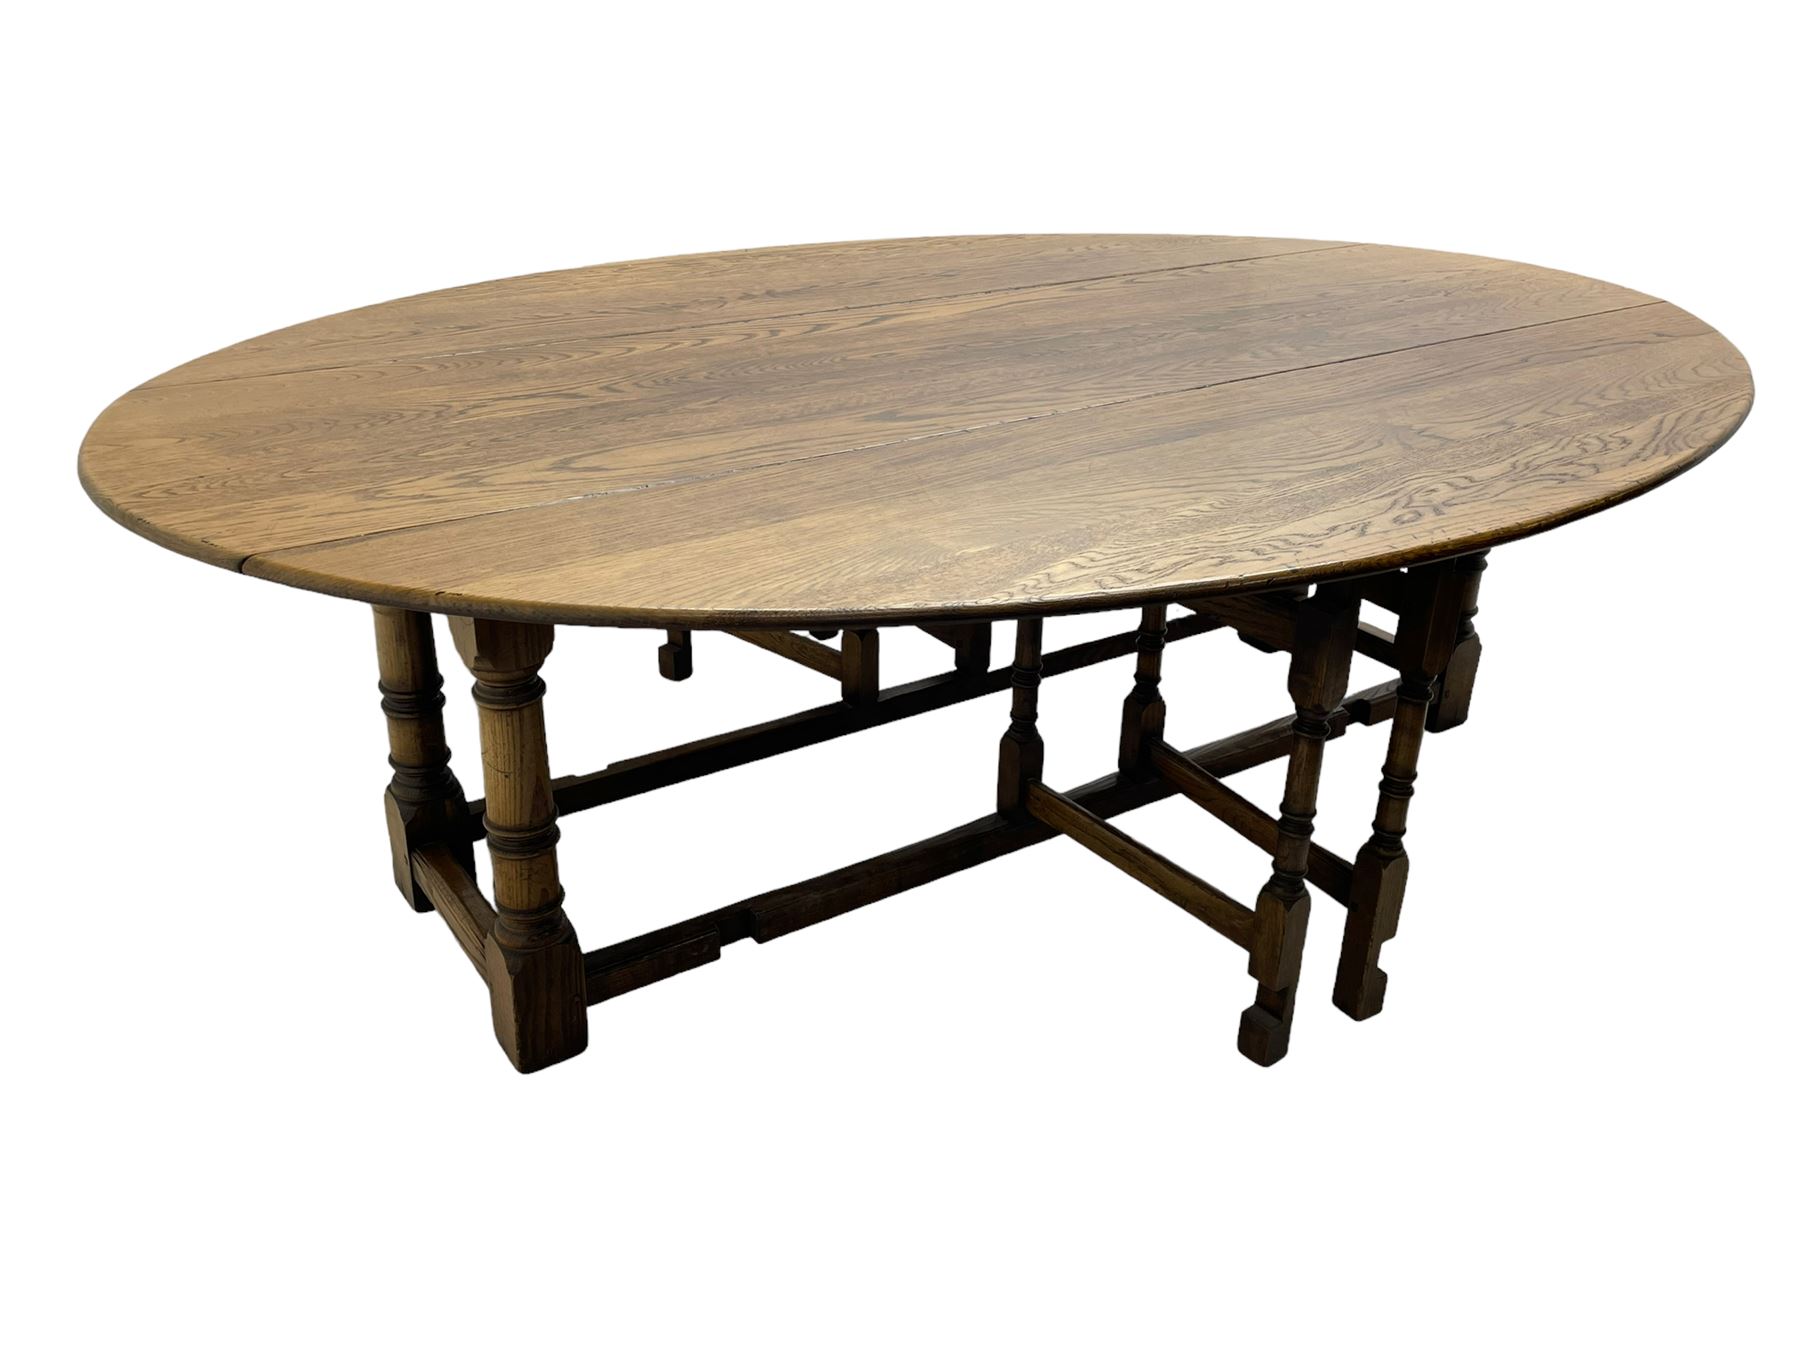 Large 18th century design oak wake or dining table - Image 5 of 12